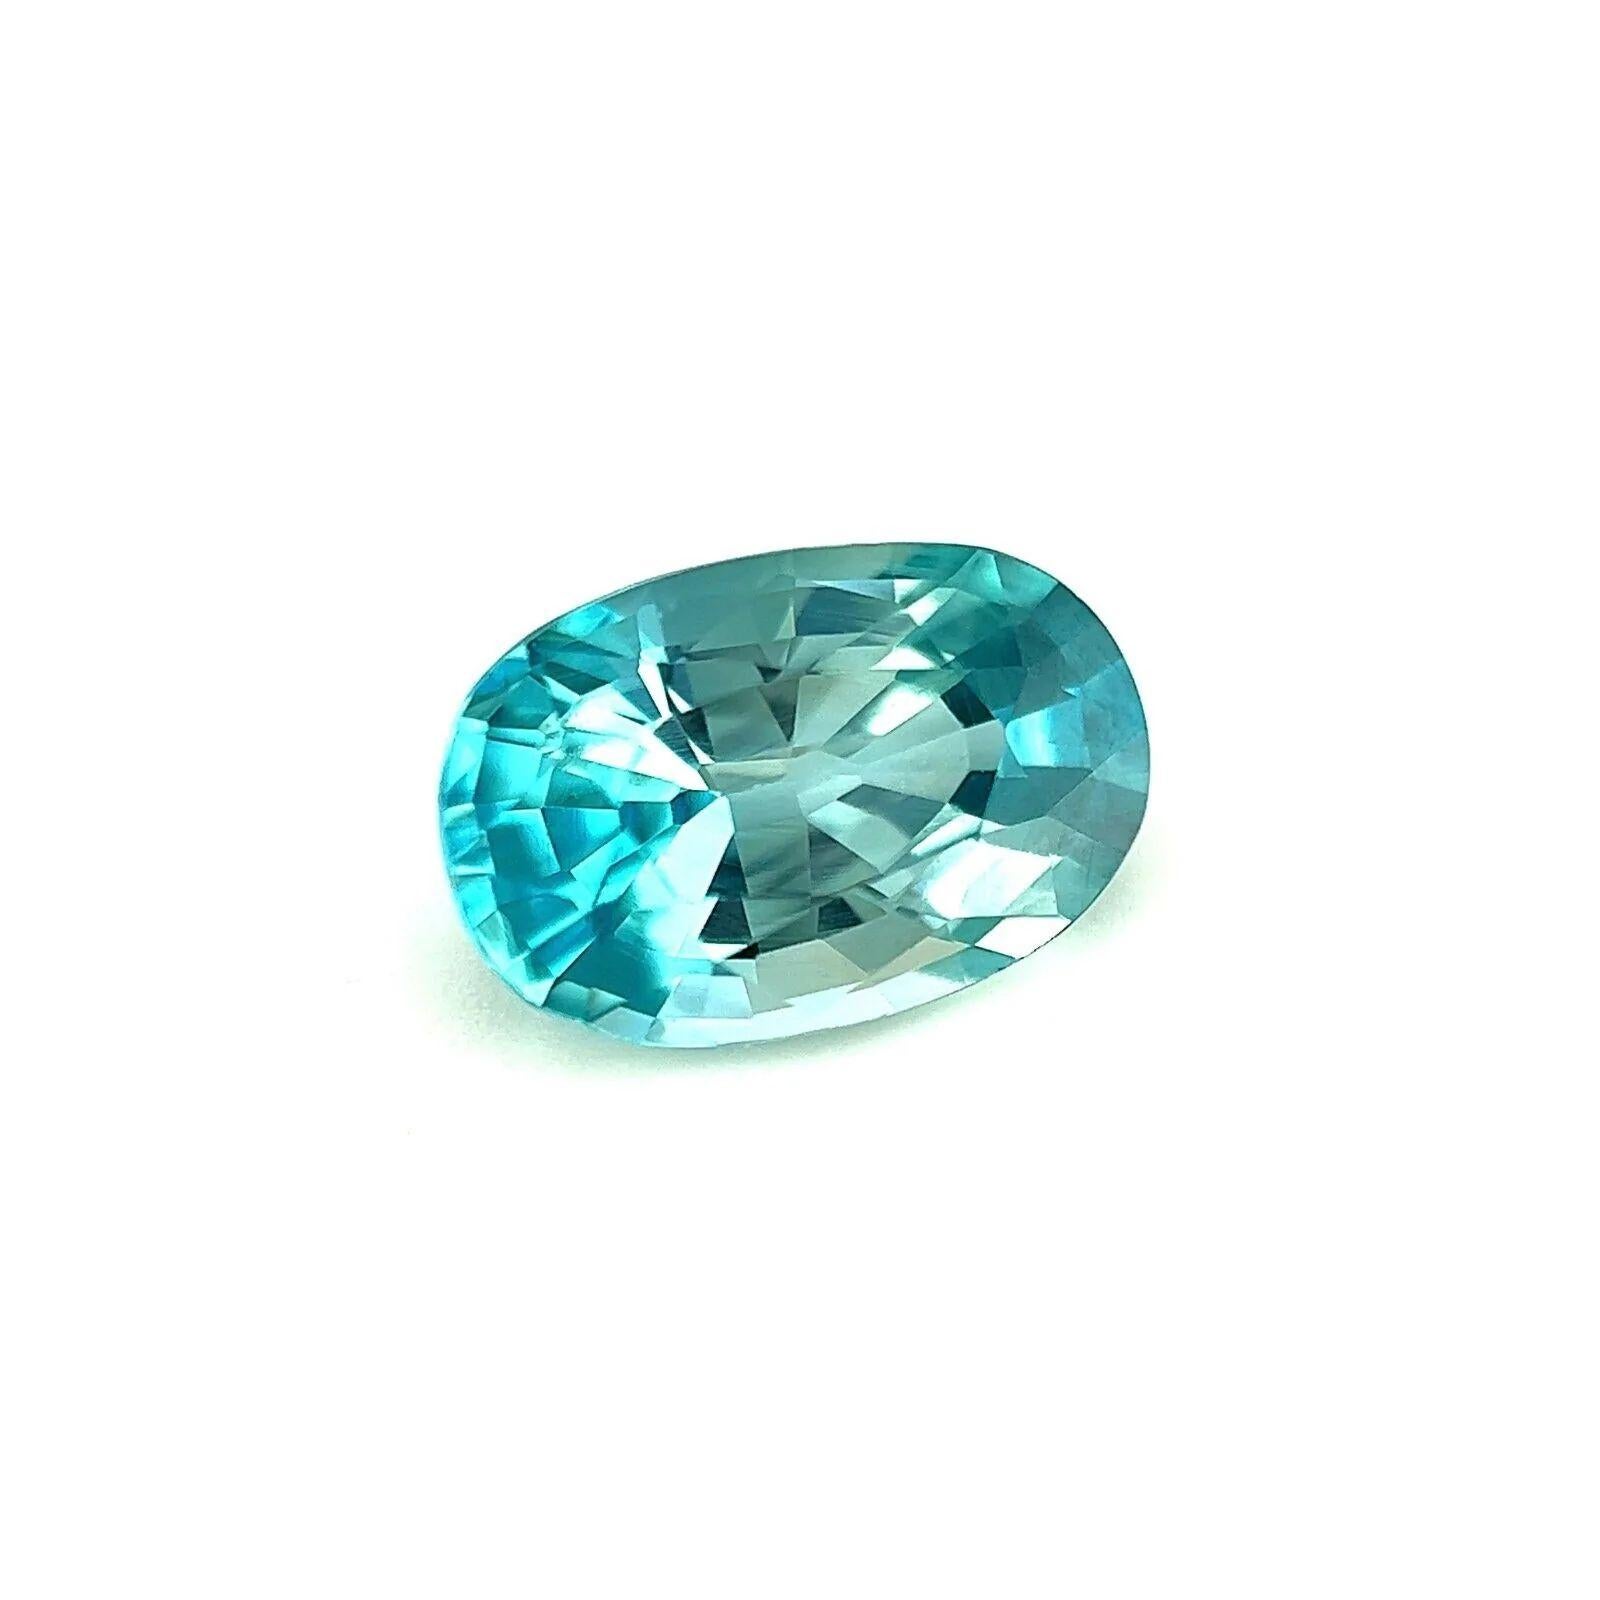 Natural 2.58ct Vivid Neon Blue Zircon Oval Cut Loose Gemstone 9.5x6.3mm VS

Natural Vivid Neon Blue Zircon Gemstone.
2.58 Carat with a beautiful neon blue colour and very good clarity, a clean stone with only some small natural inclusions visible